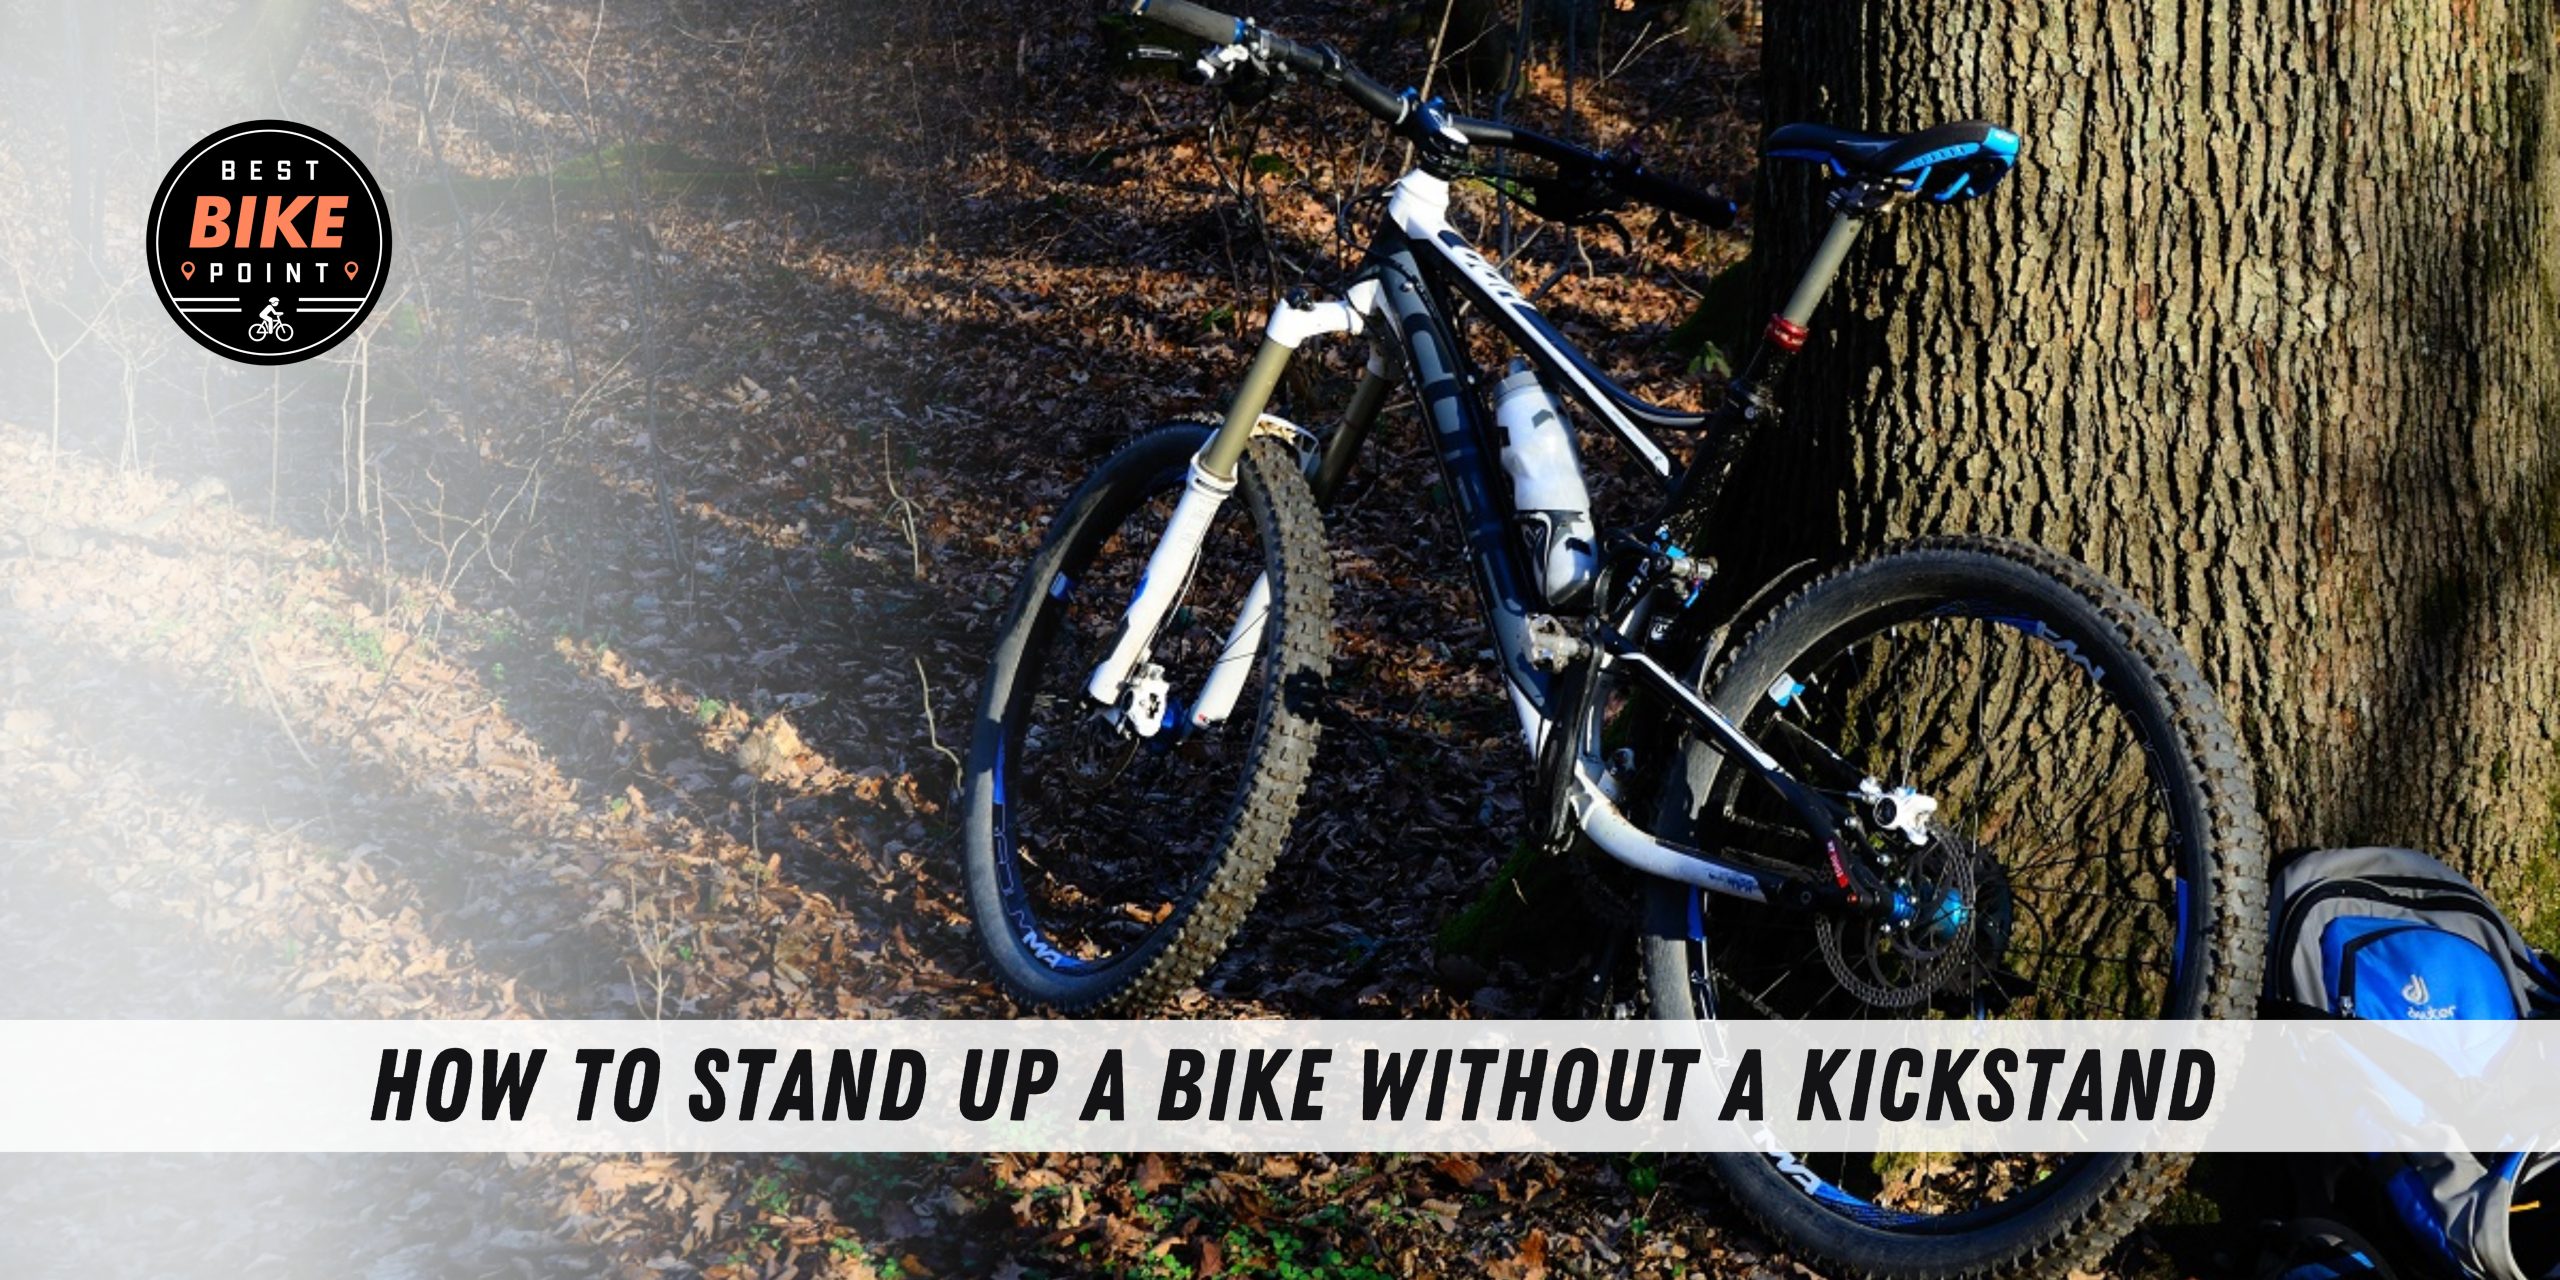 How To Stand Up A Bike Without A Kickstand